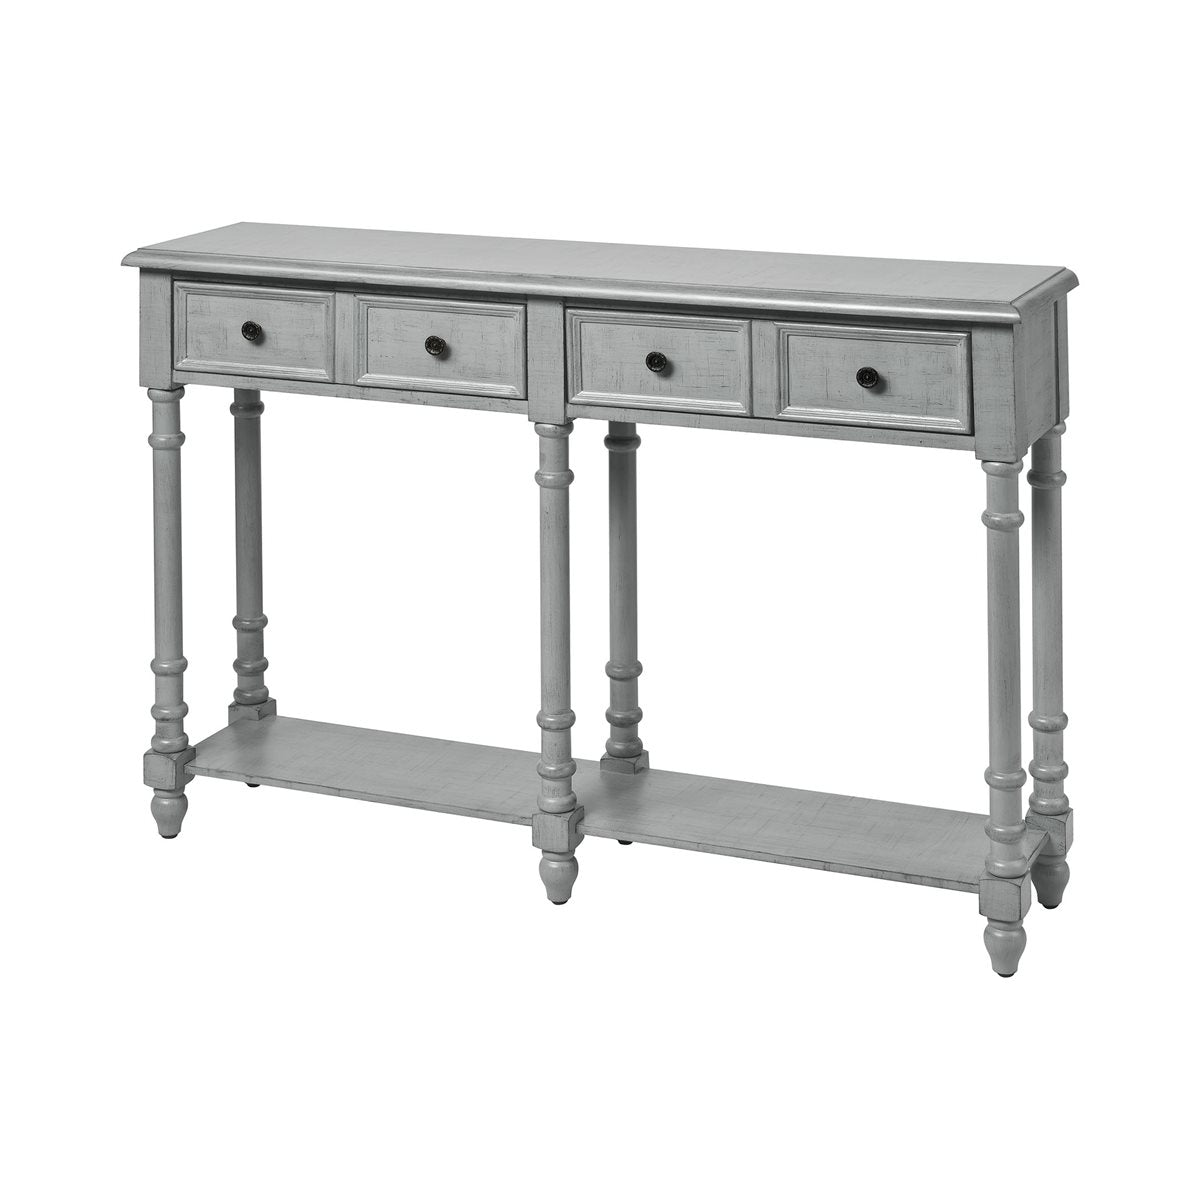 Stein World Hager Console Table Grey 16937